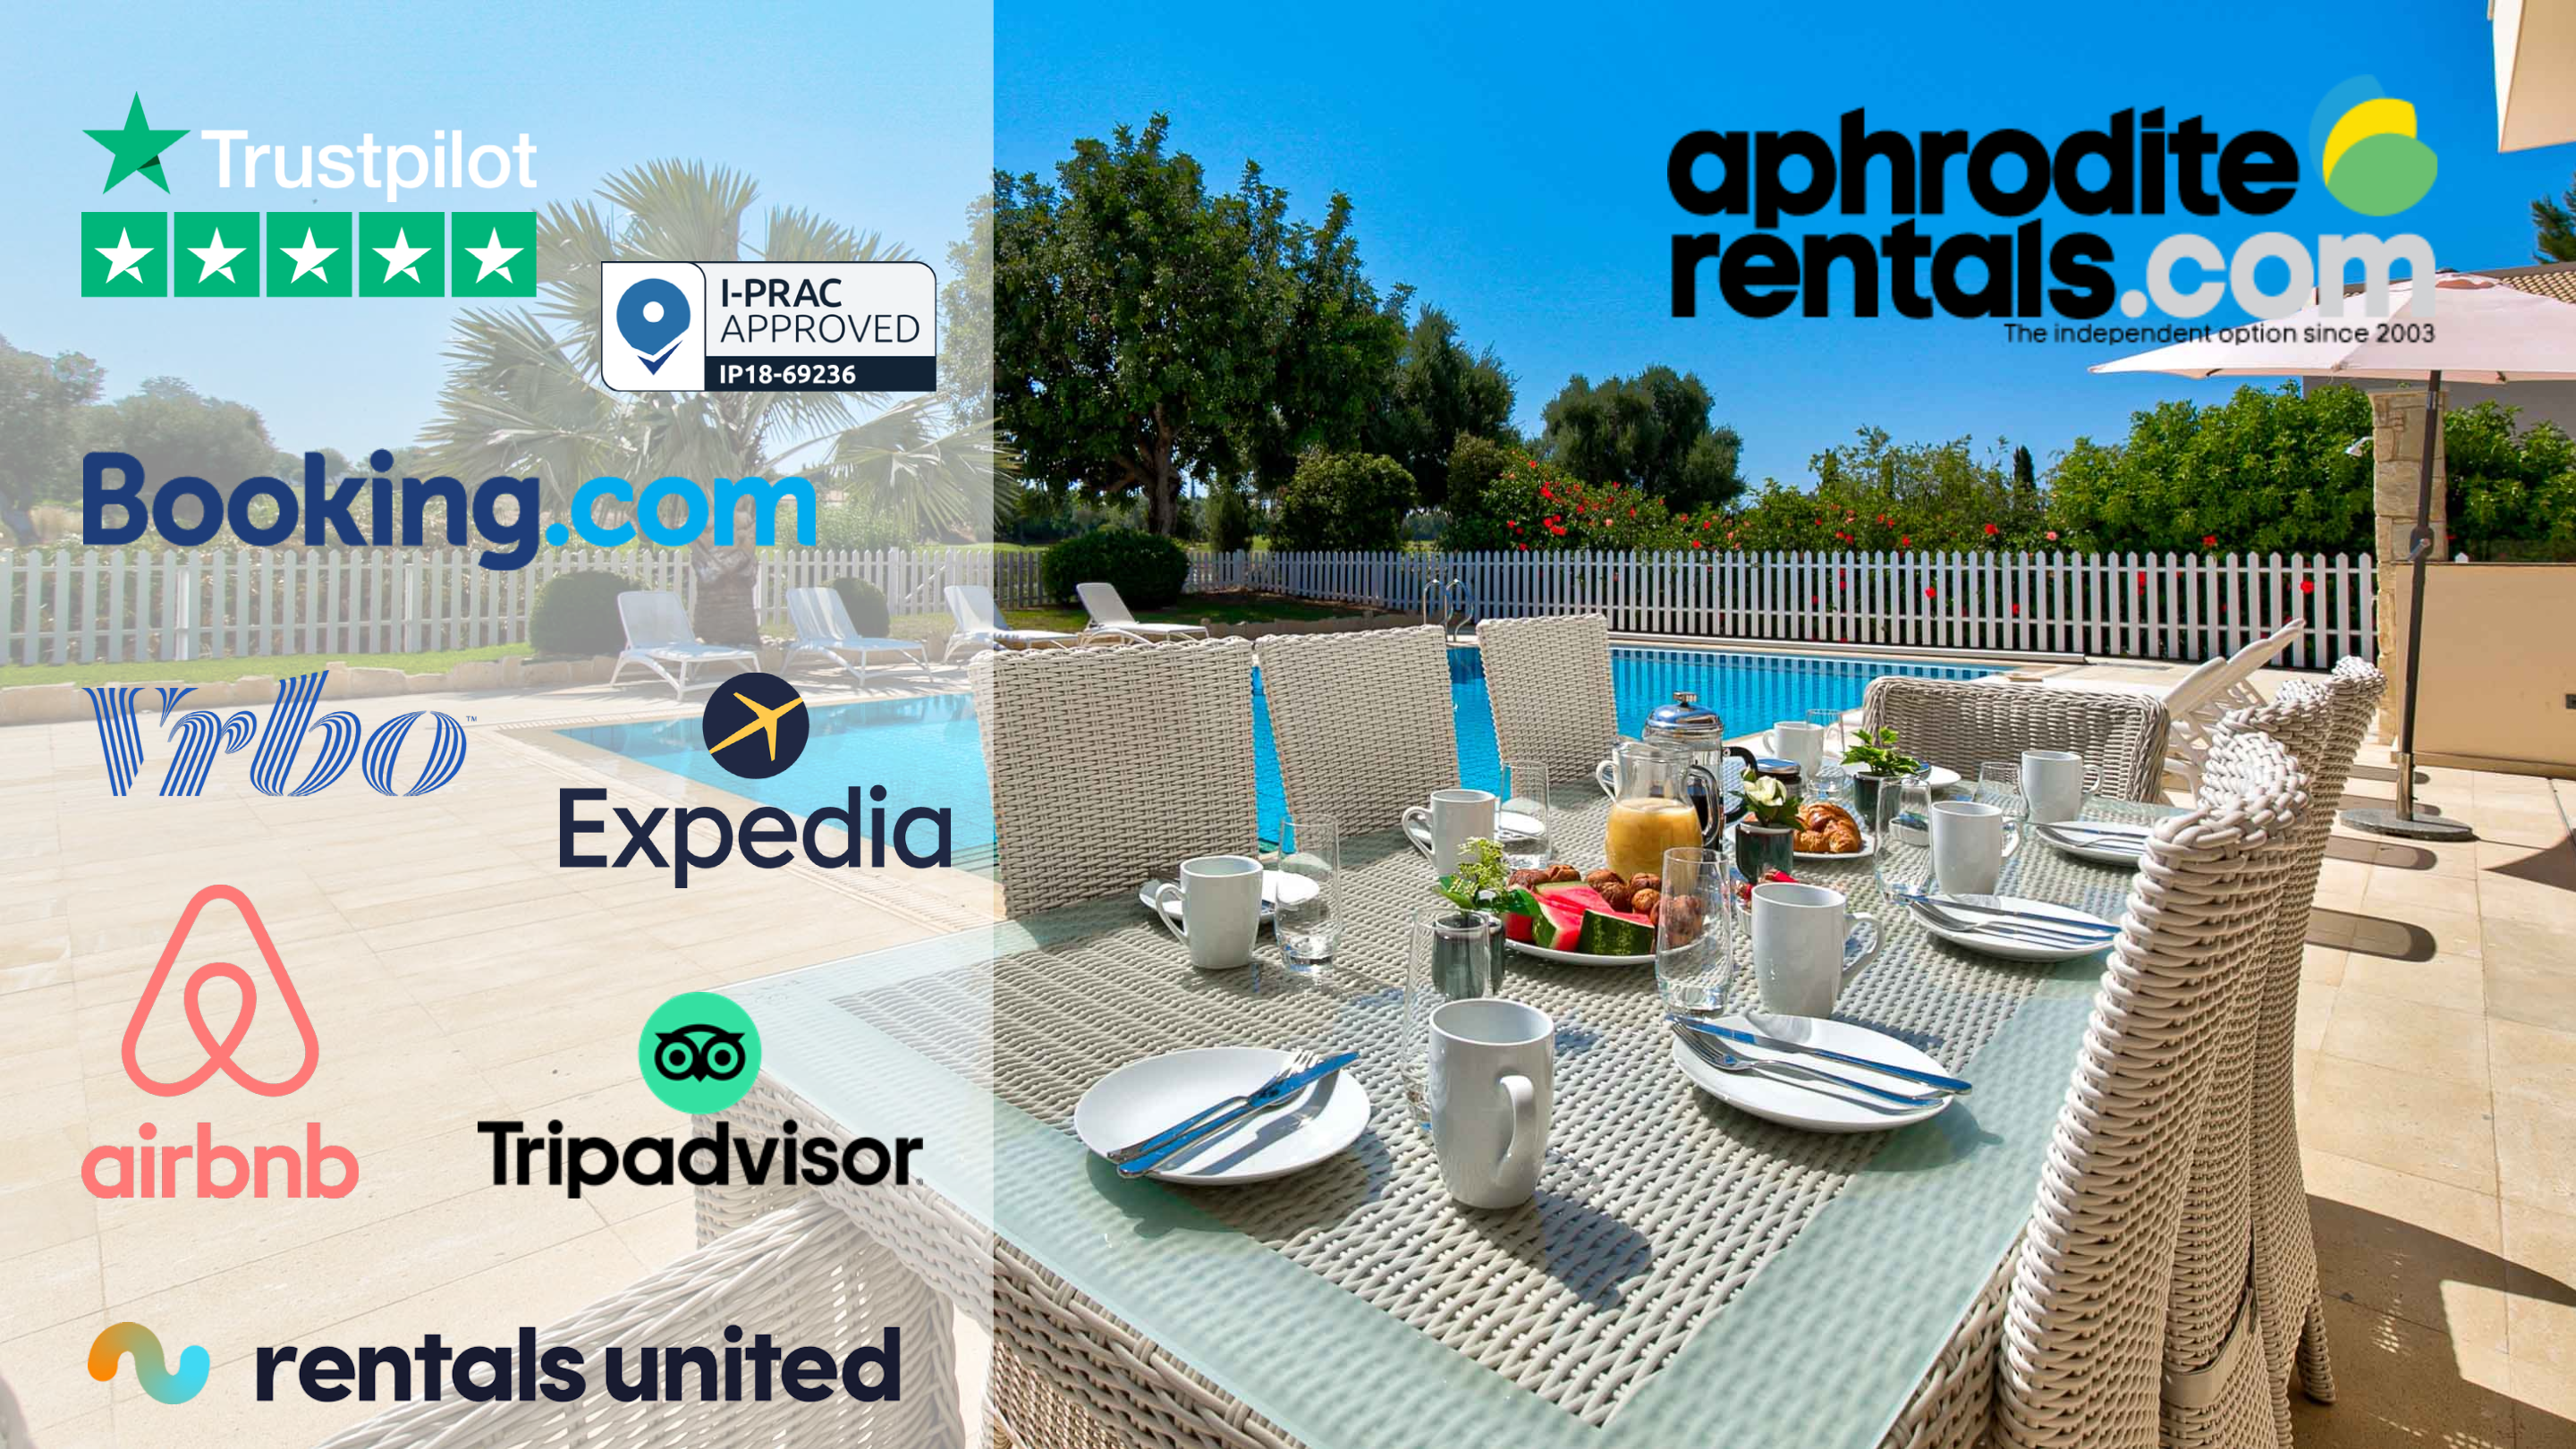 Various partner logos - booking.com, airbnb, and more, overlooking pool at a breakfast table setting. Villa Poseidon on Aphrodite Hills Resort. Aphroditerentals.com